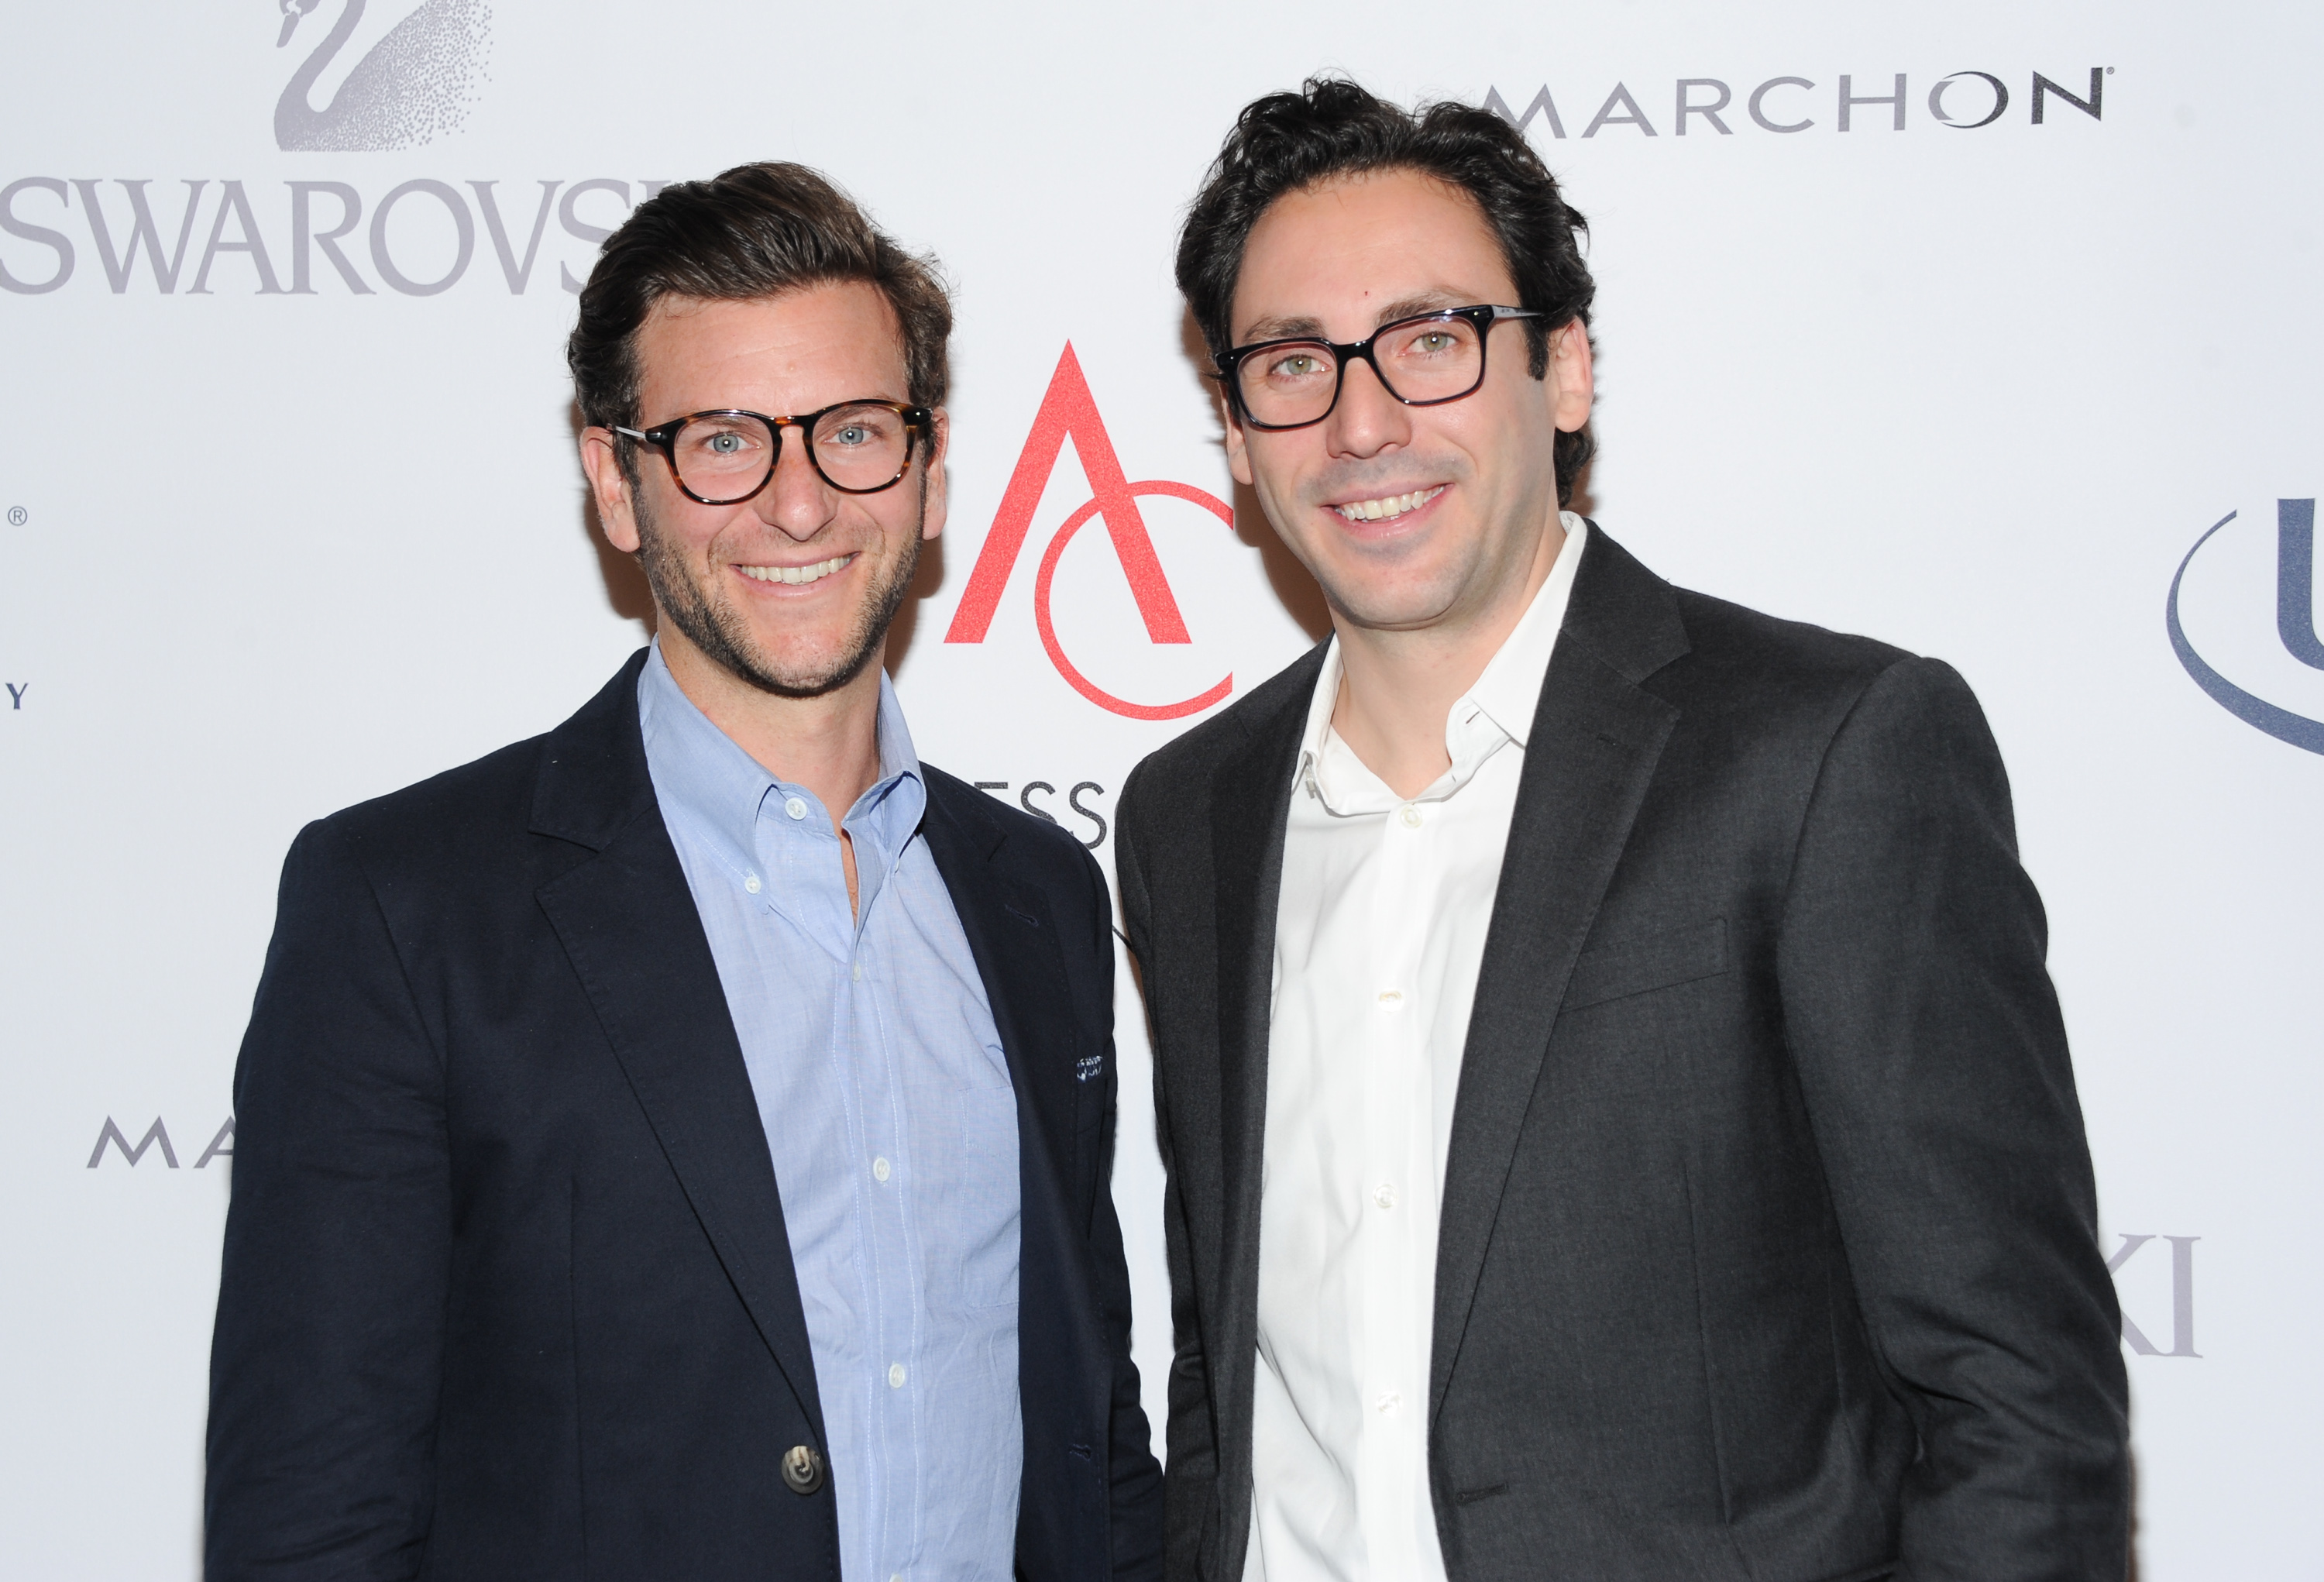 Warby Parker founders David Gilboa (L) and Neil Blumenthal attend the 17th Annual ACE Awards in New York City on Nov. 4, 2013.